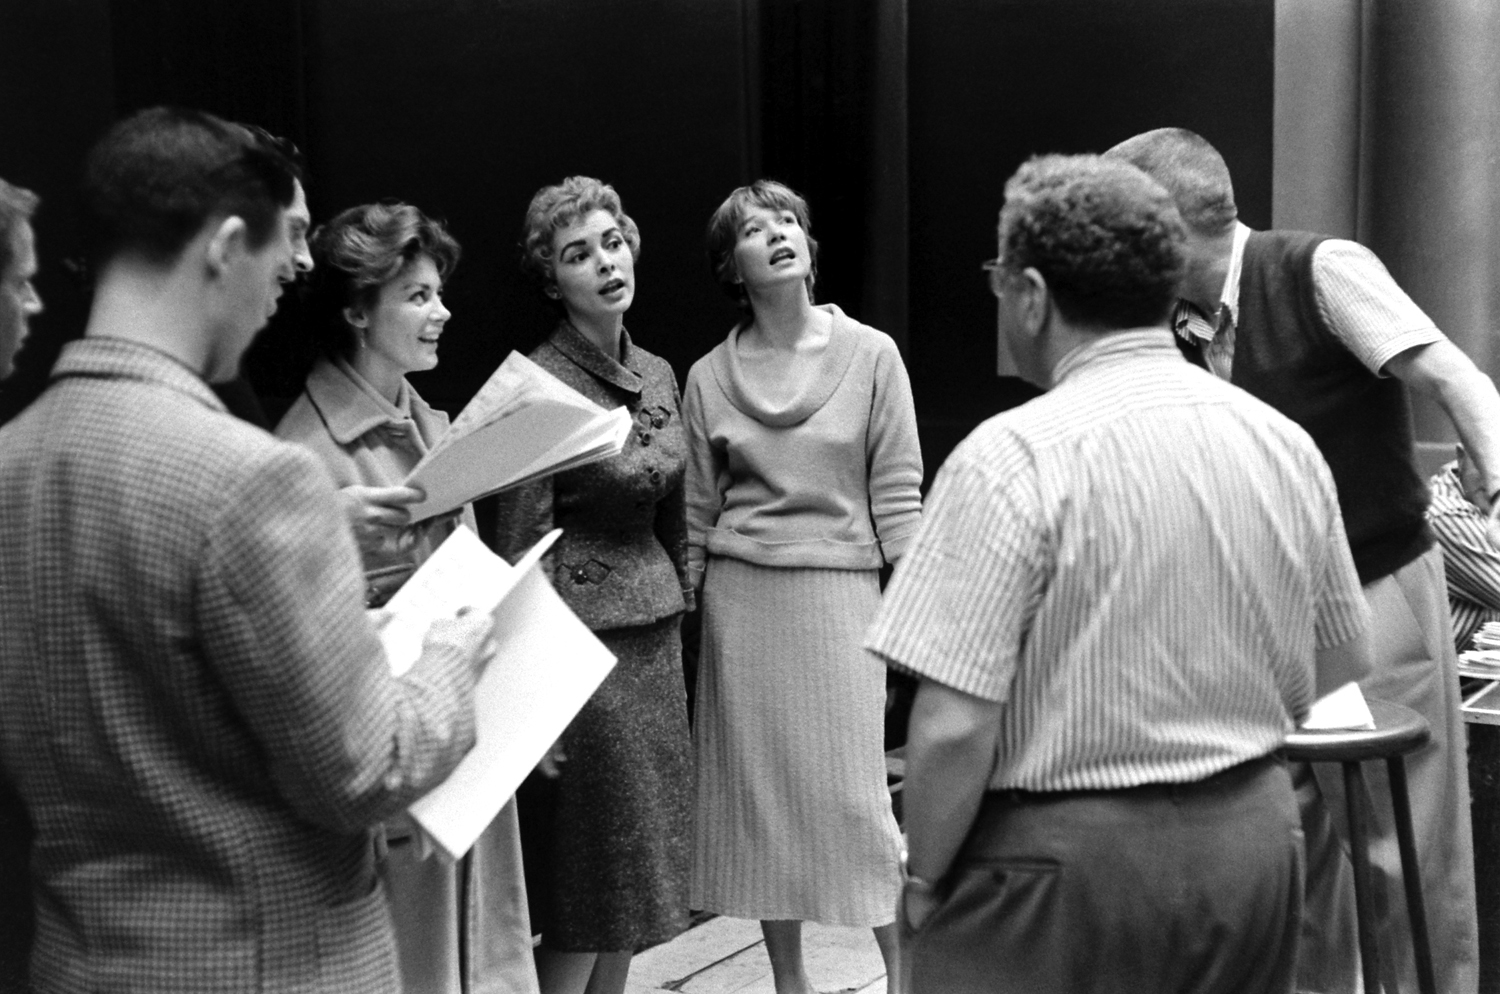 Inside the RKO Pantages Theater, home of the Academy Awards, Janet Leigh, Shirley MacLaine and others rehearse in 1958.